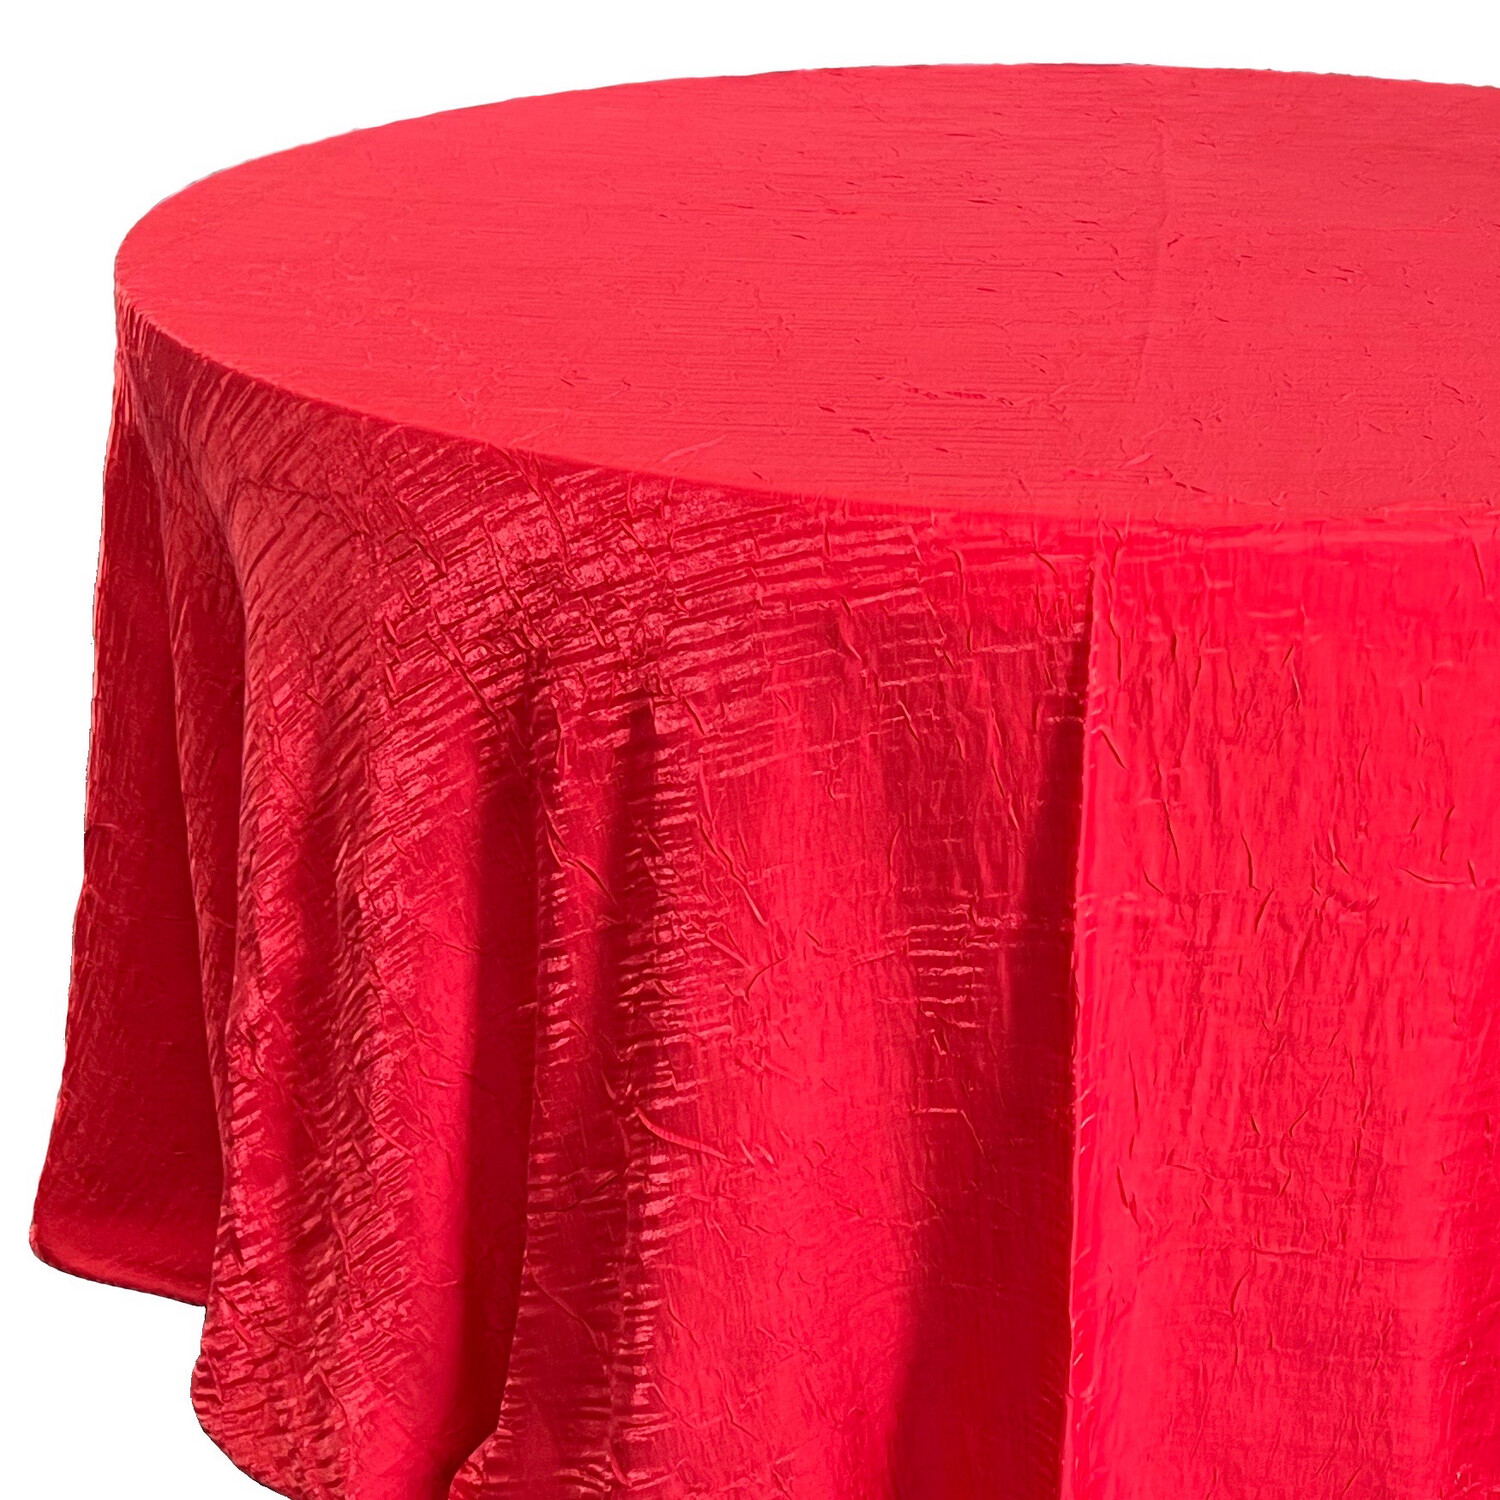 Red Crushed Iridescent Satin Linens